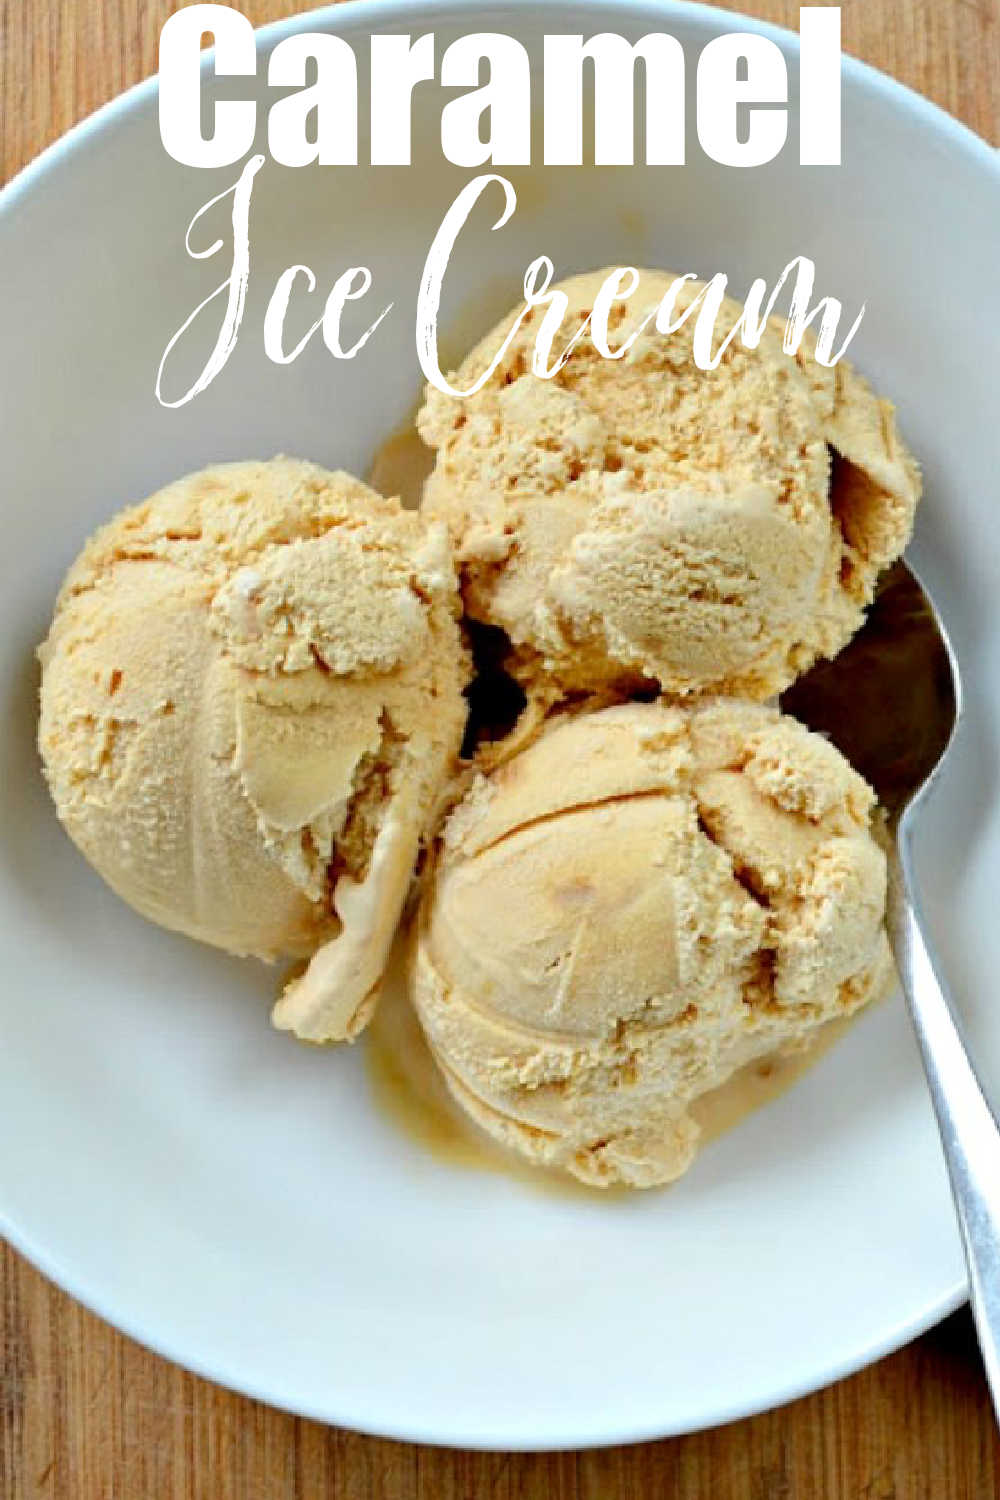 3 scoops Caramel Ice Cream with Caramel Swirl in a white bowl.